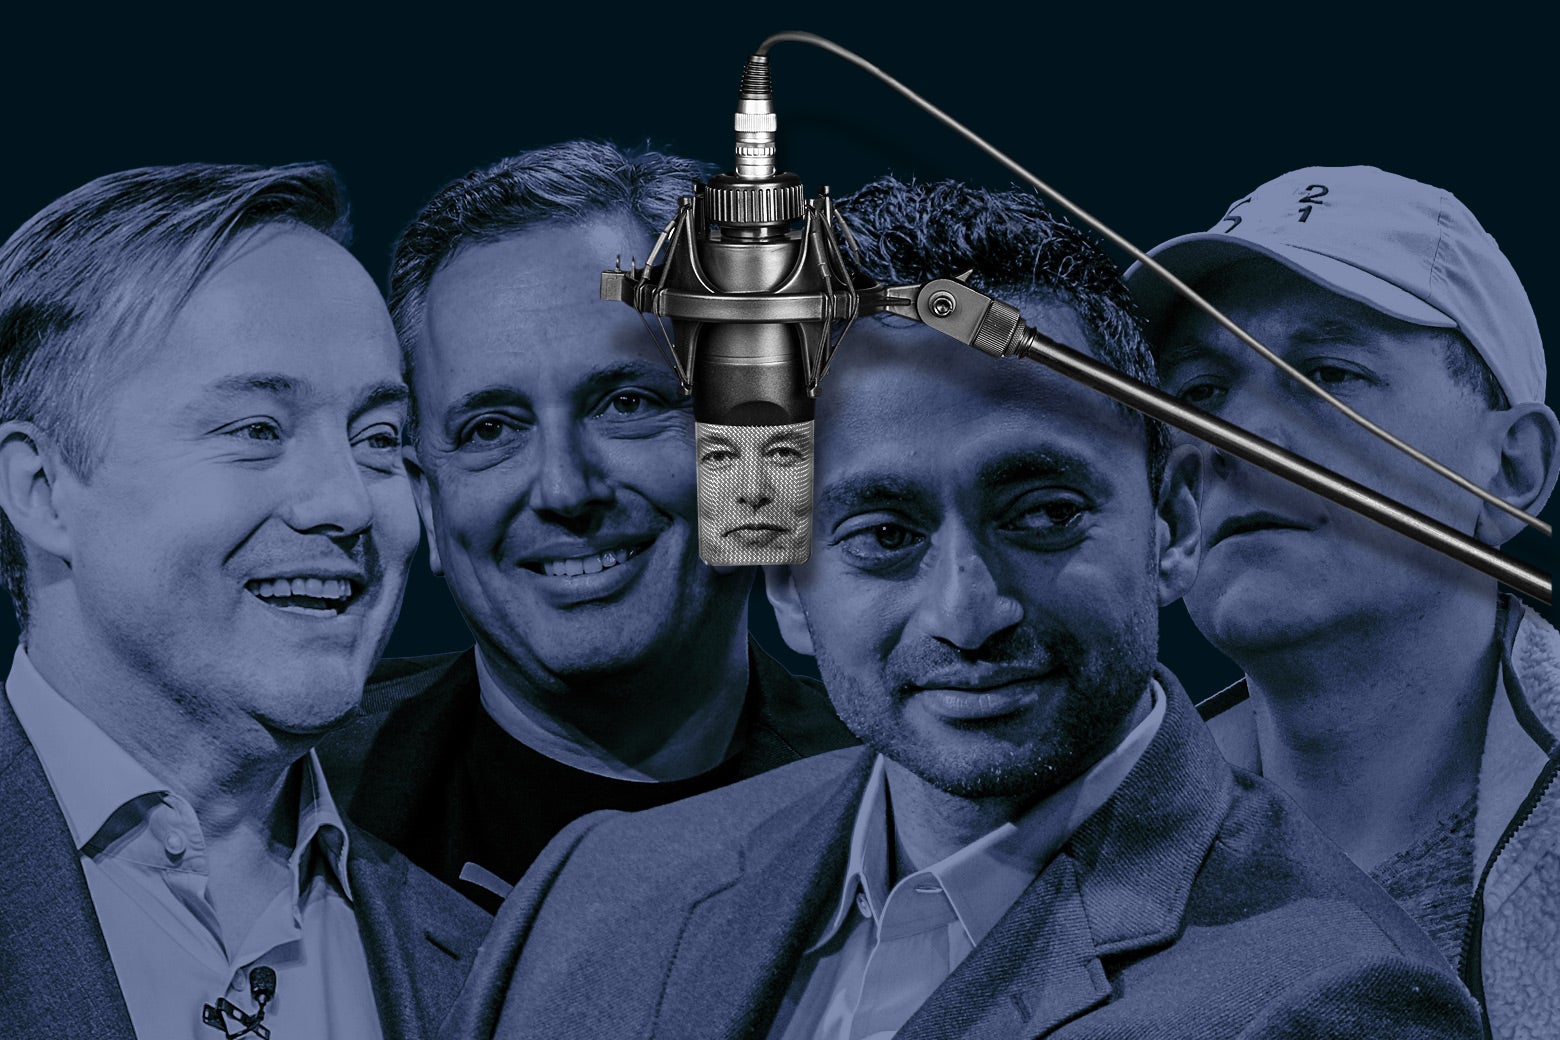 The faces of the four podcasters huddled around a microphone that is a picture of Elon Musk.